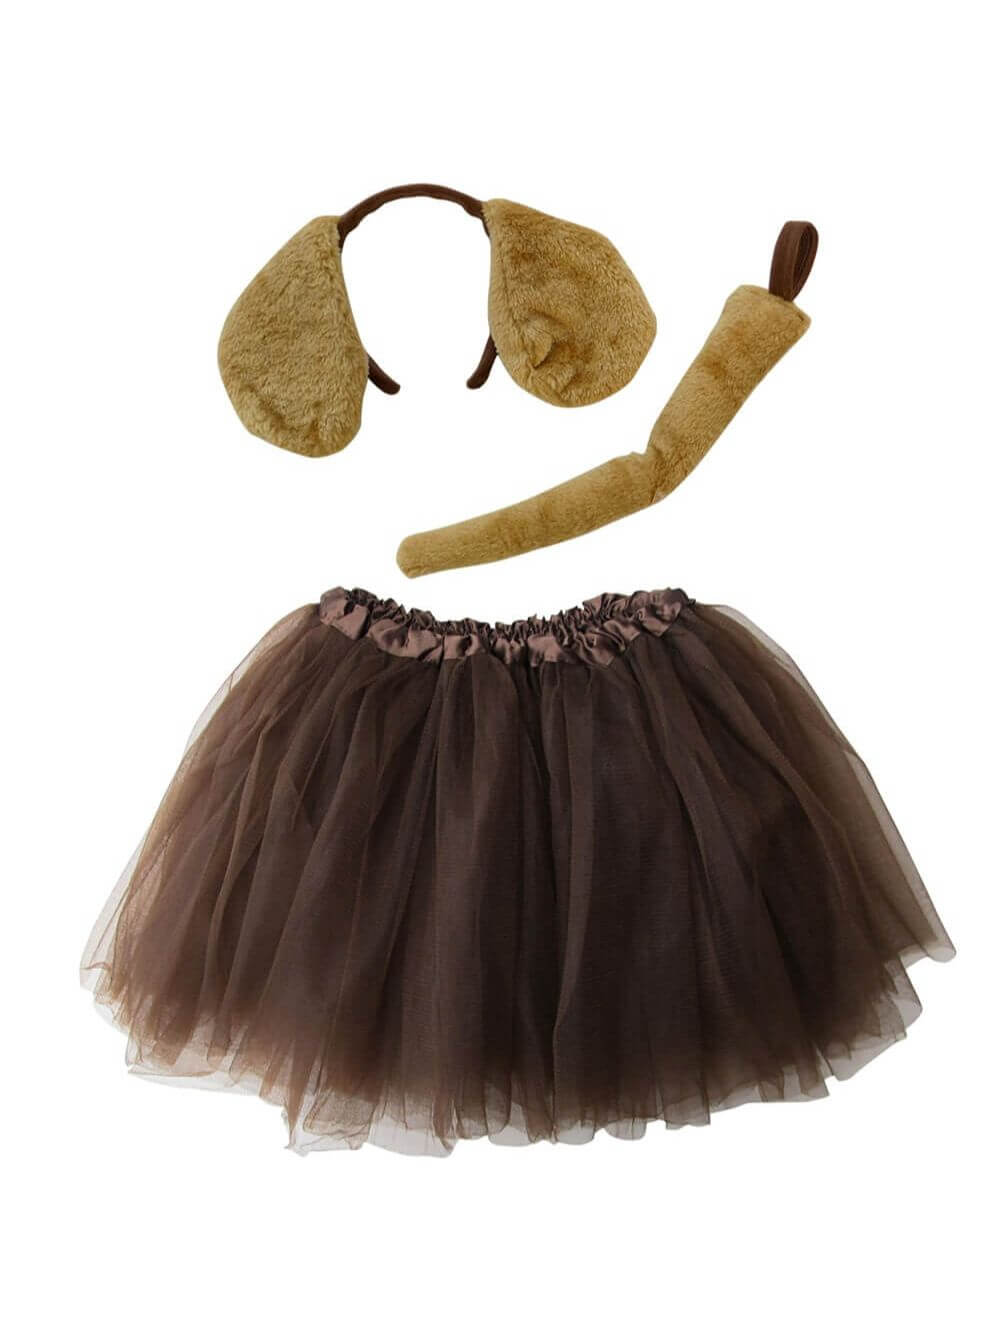 Adult Brown Puppy Dog Costume - Tutu Skirt, Tail, & Headband Set for Adult or Plus Size - Sydney So Sweet